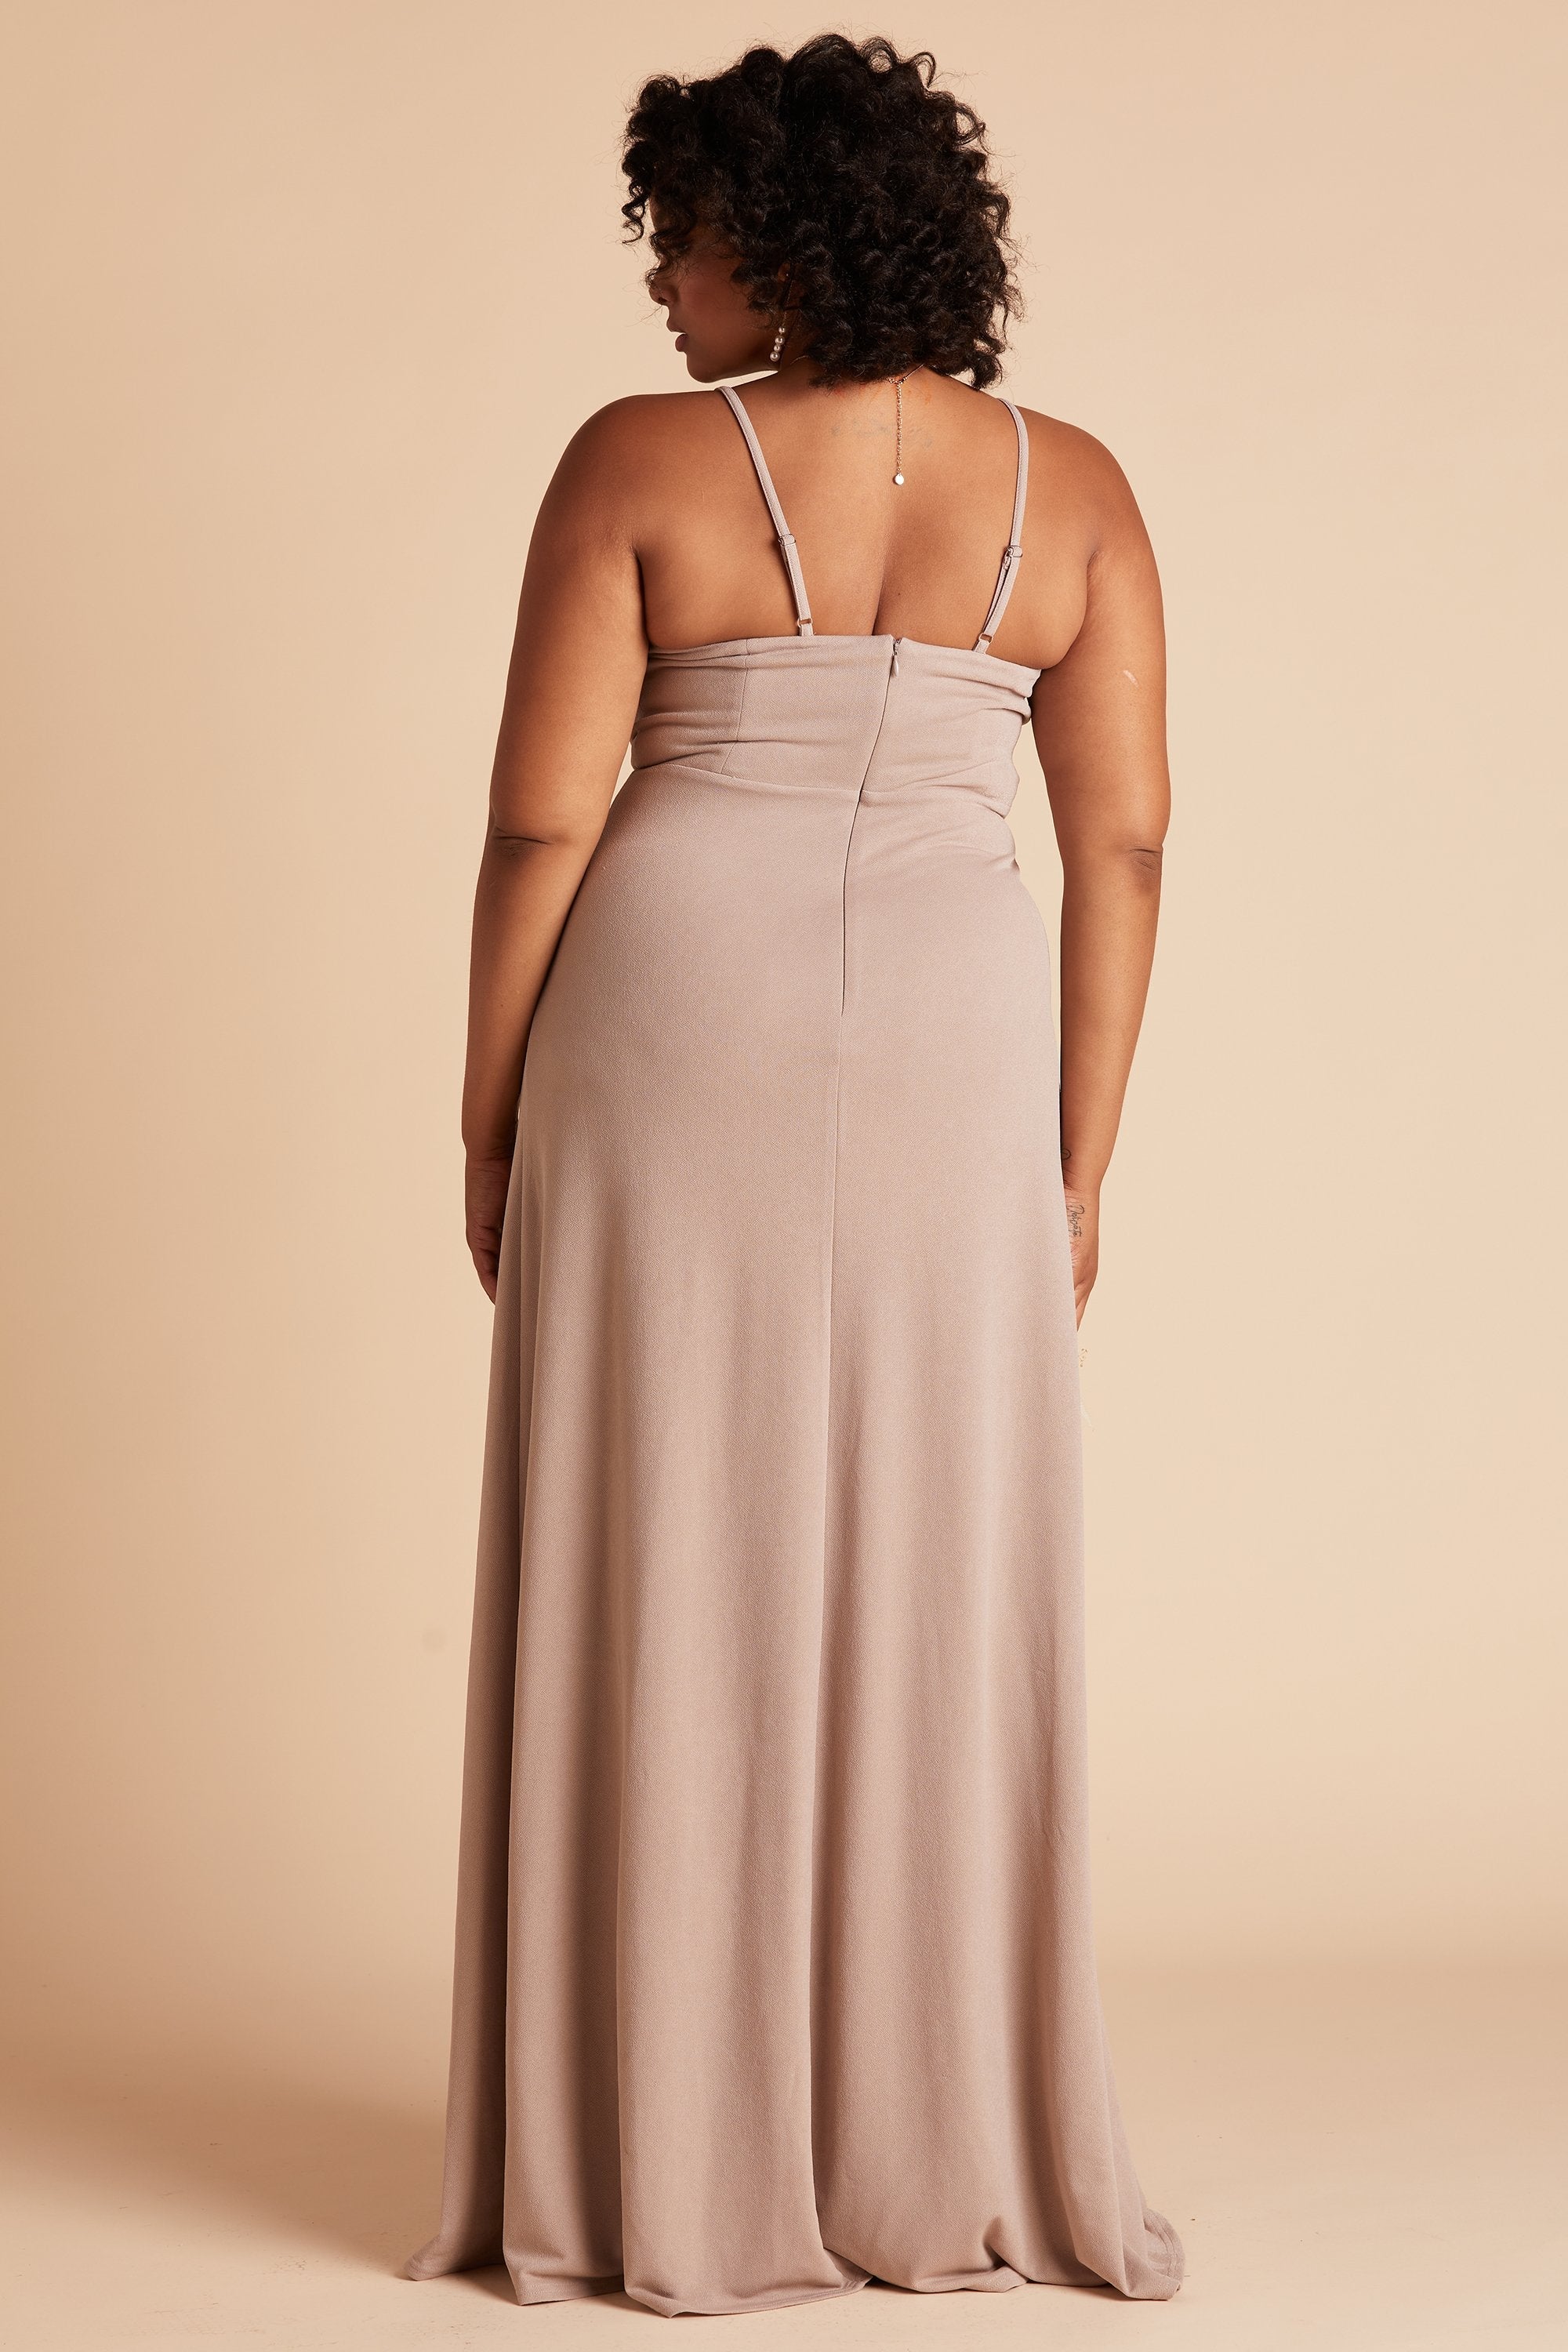 Side view of the floor-length Ash Plus Size Bridesmaid Dress in taupe crepe features a fitted bust and waist with a flowing skirt that drapes to the floor.